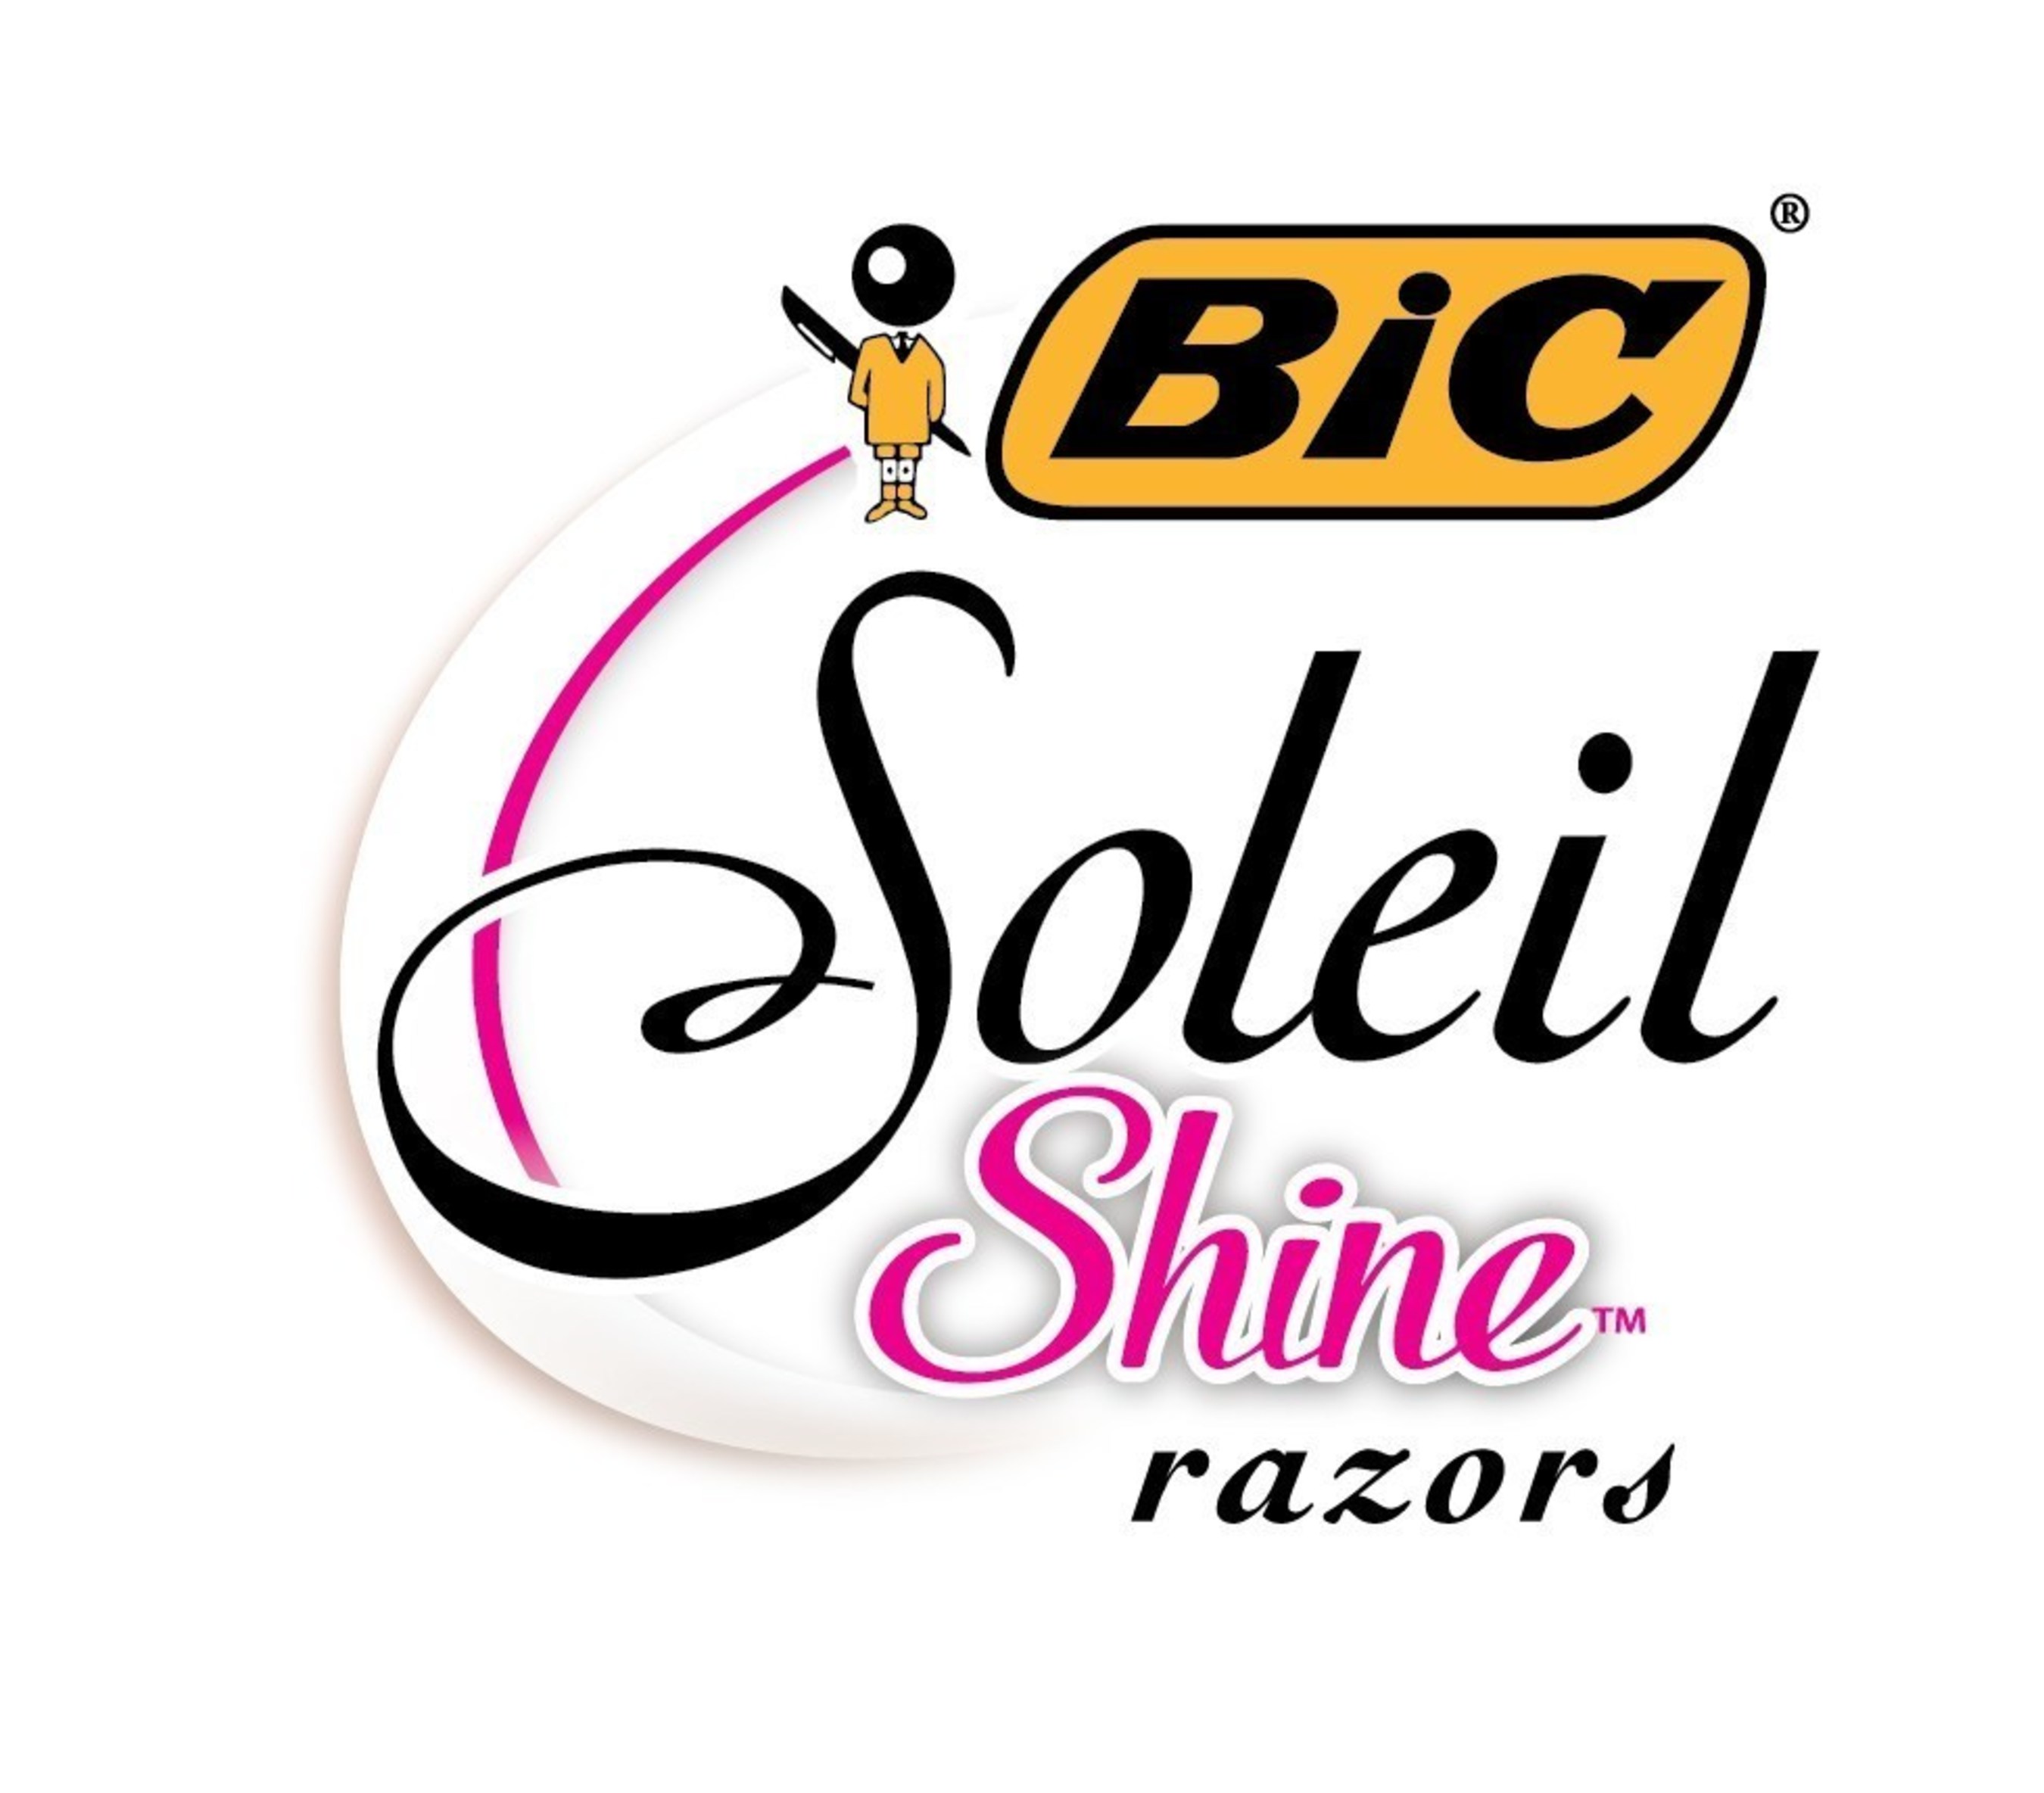 BIC Soleil Shine is the first Soleil razor to offer five flexible blades to ensure a smooth, ultra-close shave.